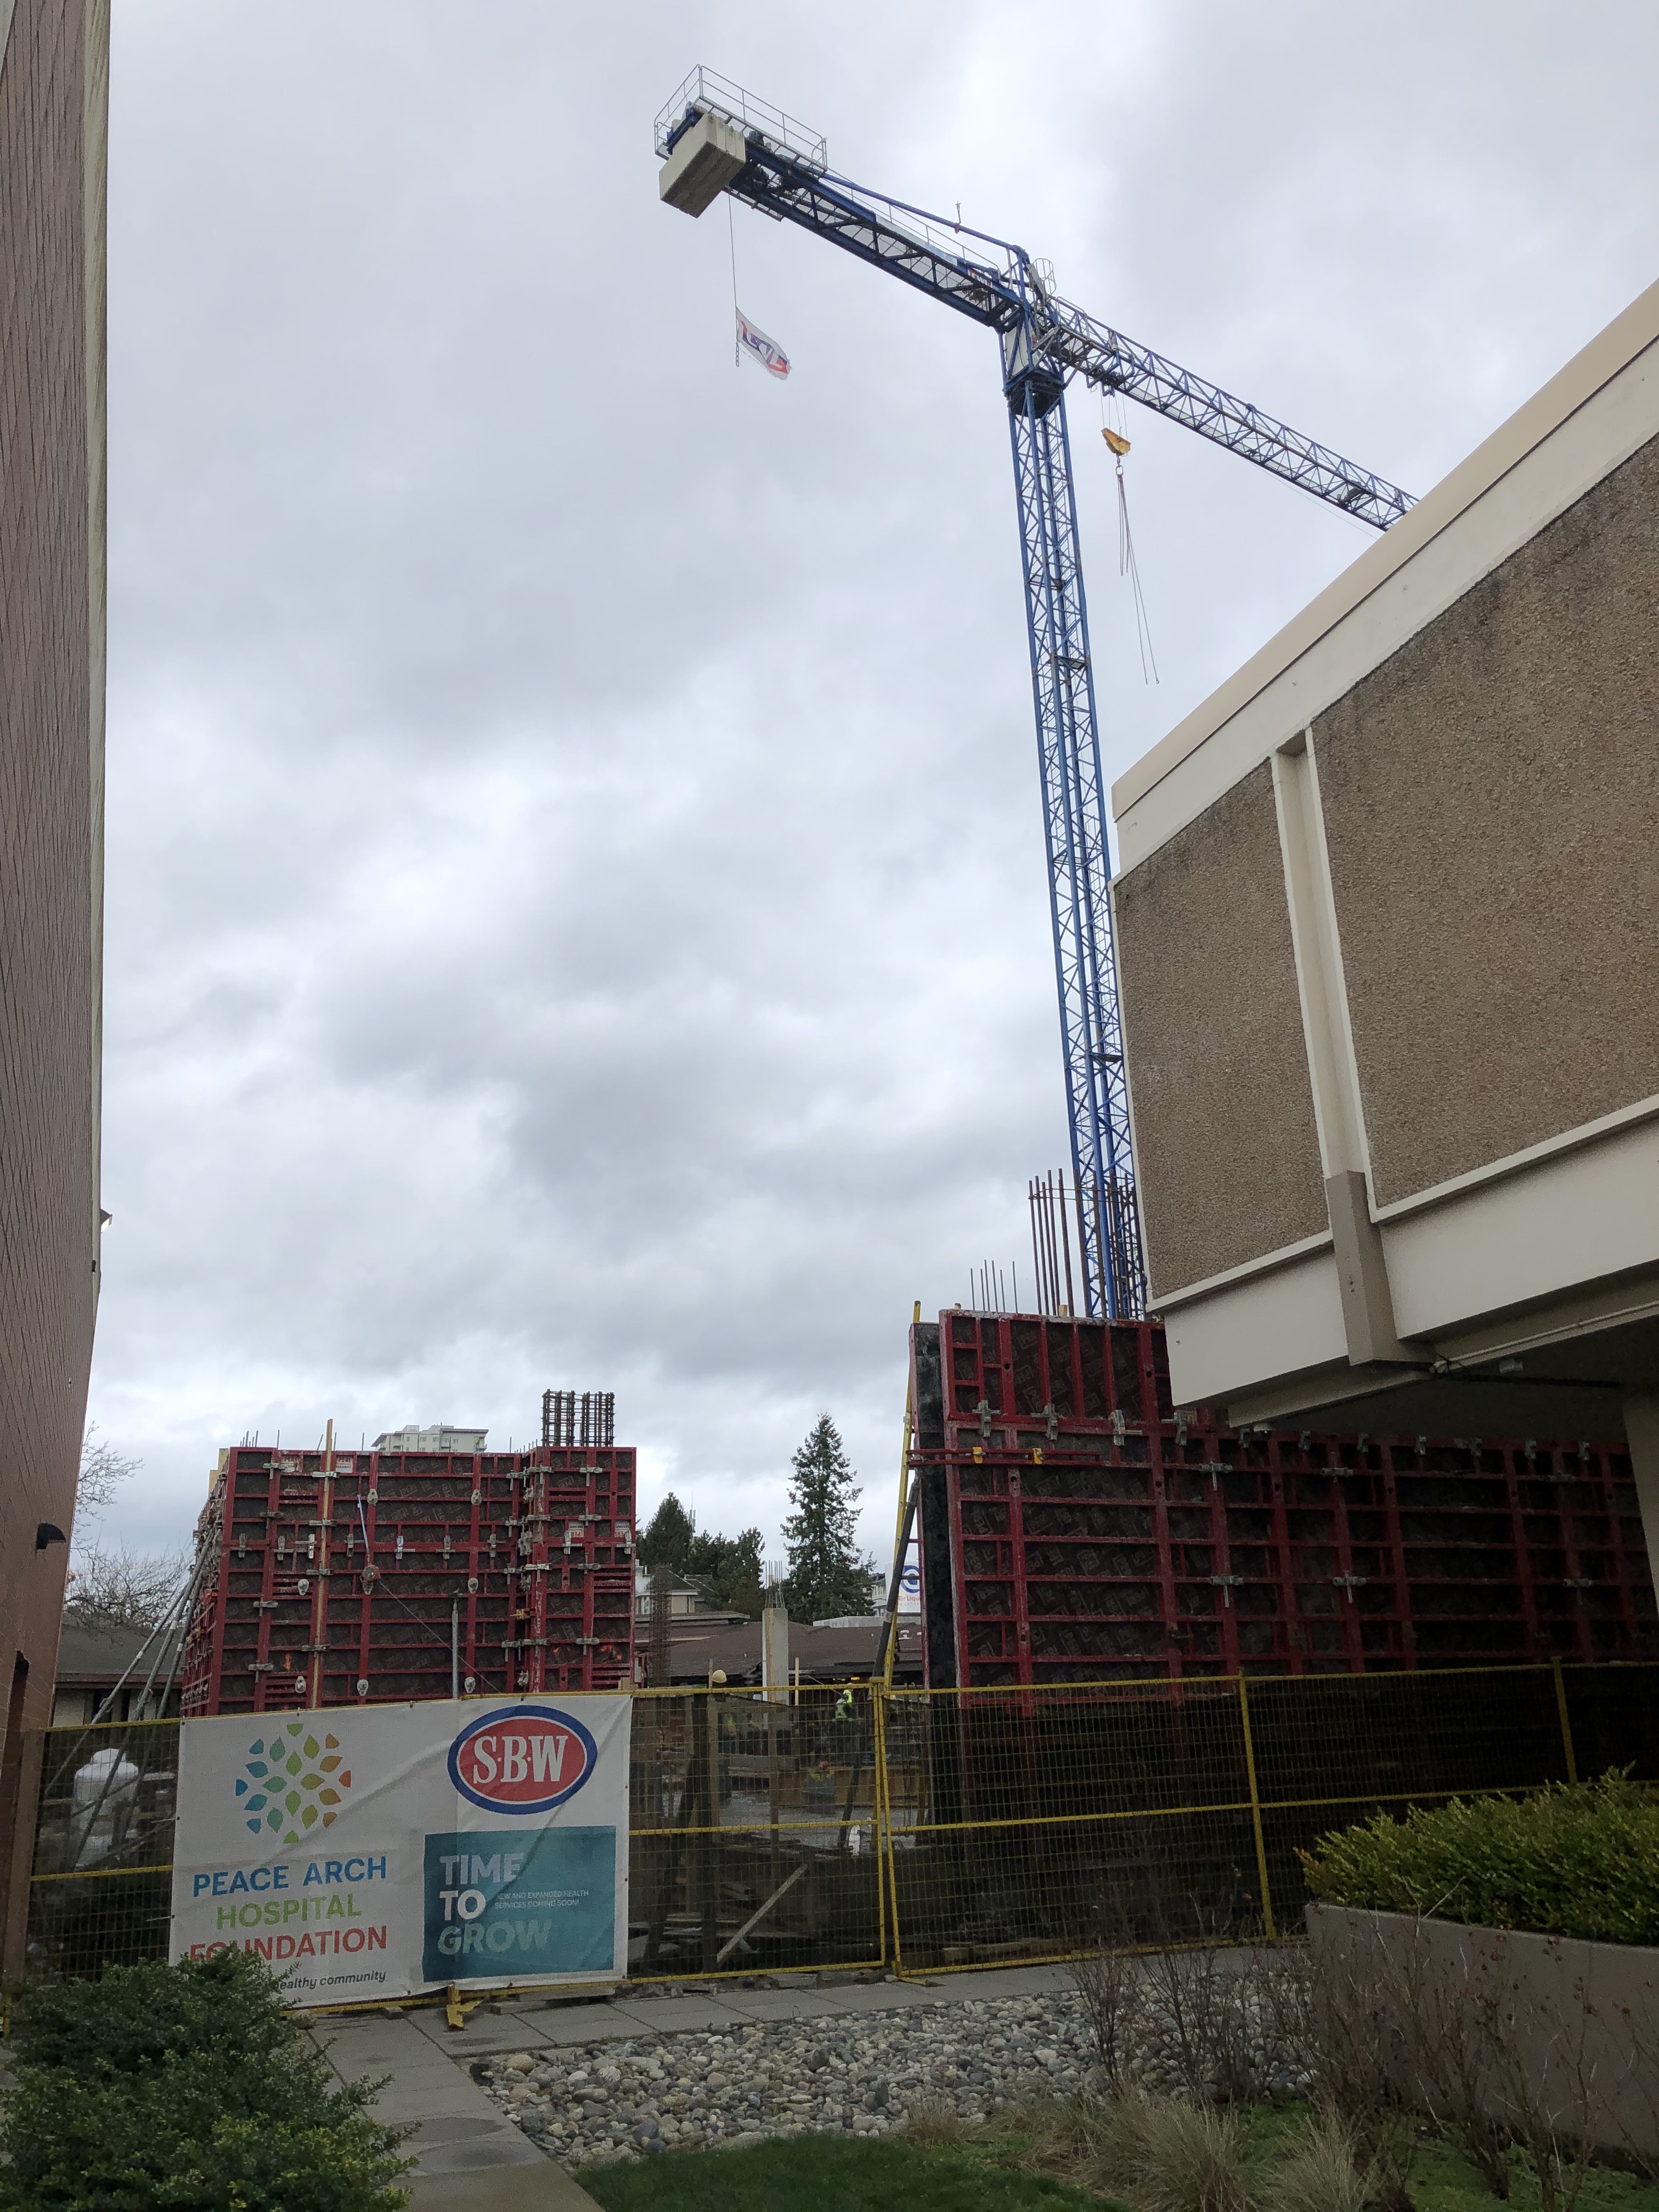 Walls and framing of emergency department take shape – January 21, 2020